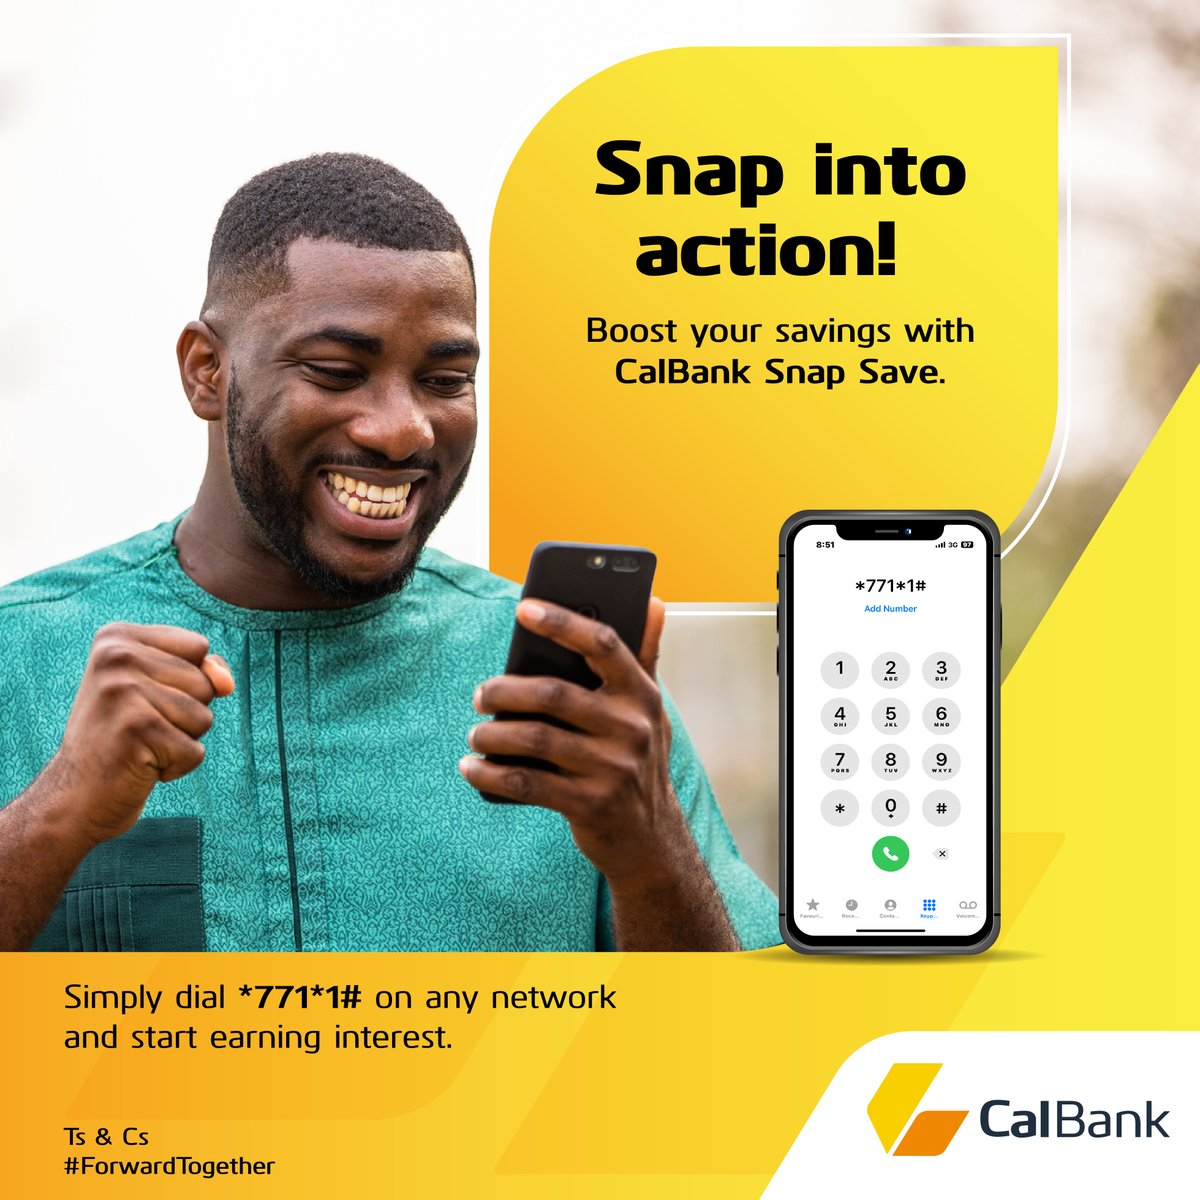 Boost your savings with CalBank Snap Save!😍😋🔊

Simply dial *771*1# on any network to begin your savings journey and start earning interest. Remember, Ts & Cs Apply👌

#CalBank #ForwardTogether #savings #SavingsPlan